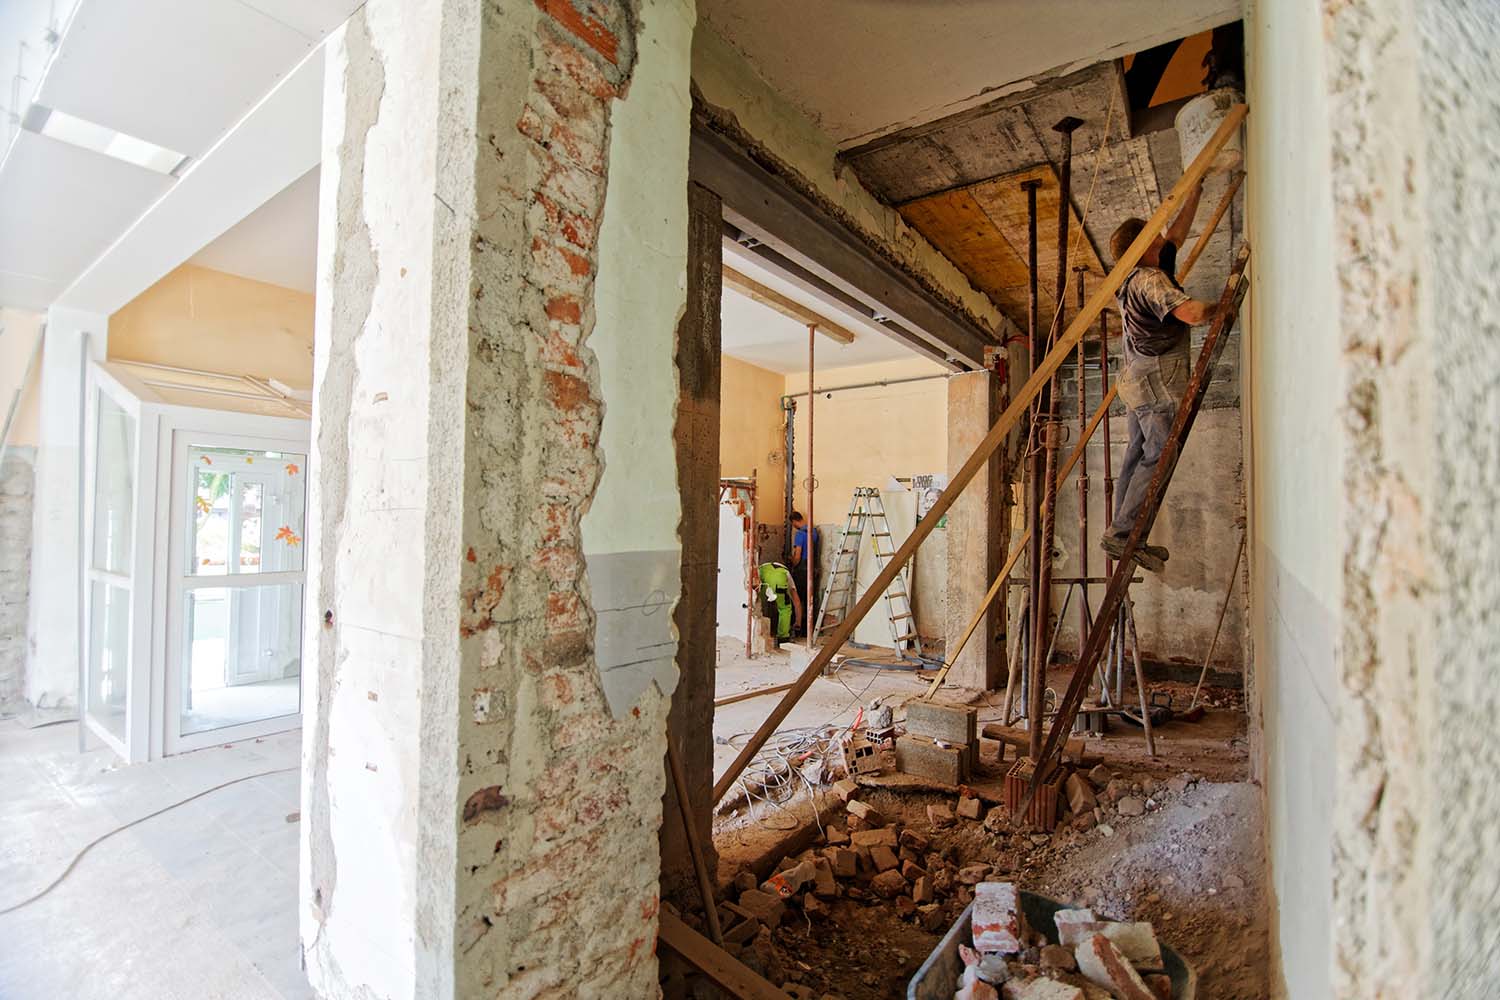 How a home renovation can improve the
overall functionality of a home